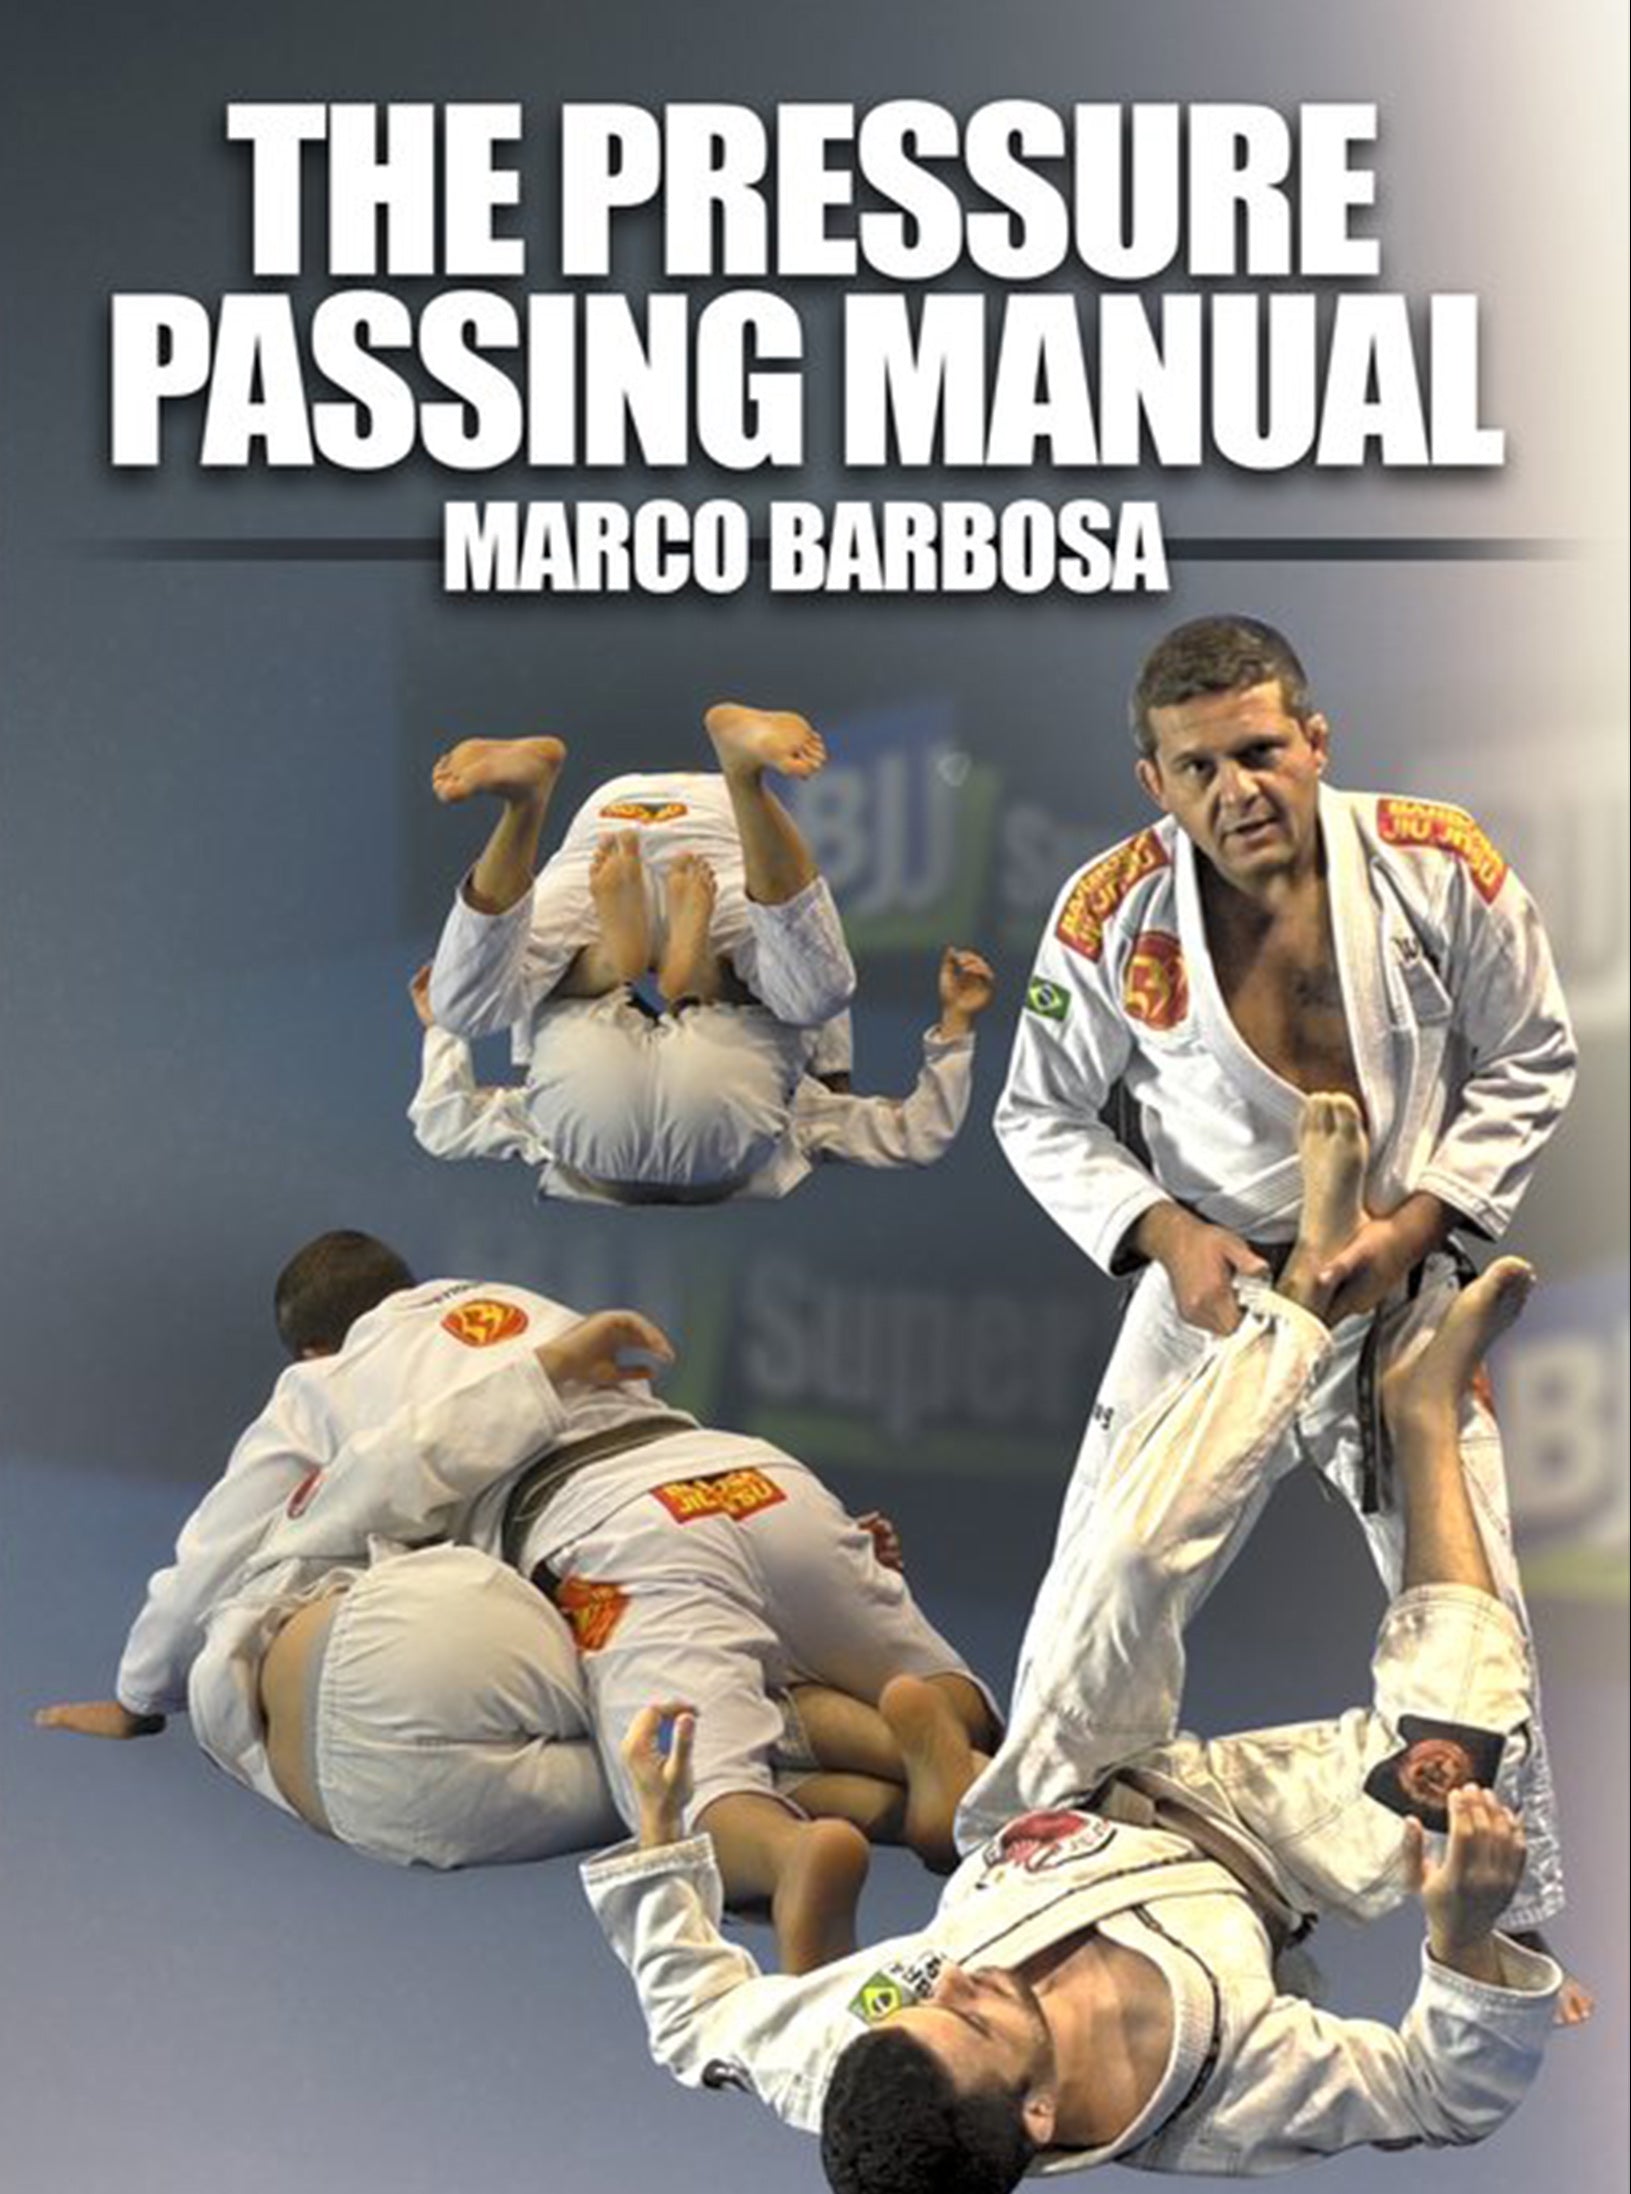 The Pressure Passing Manual by Marco Barbosa